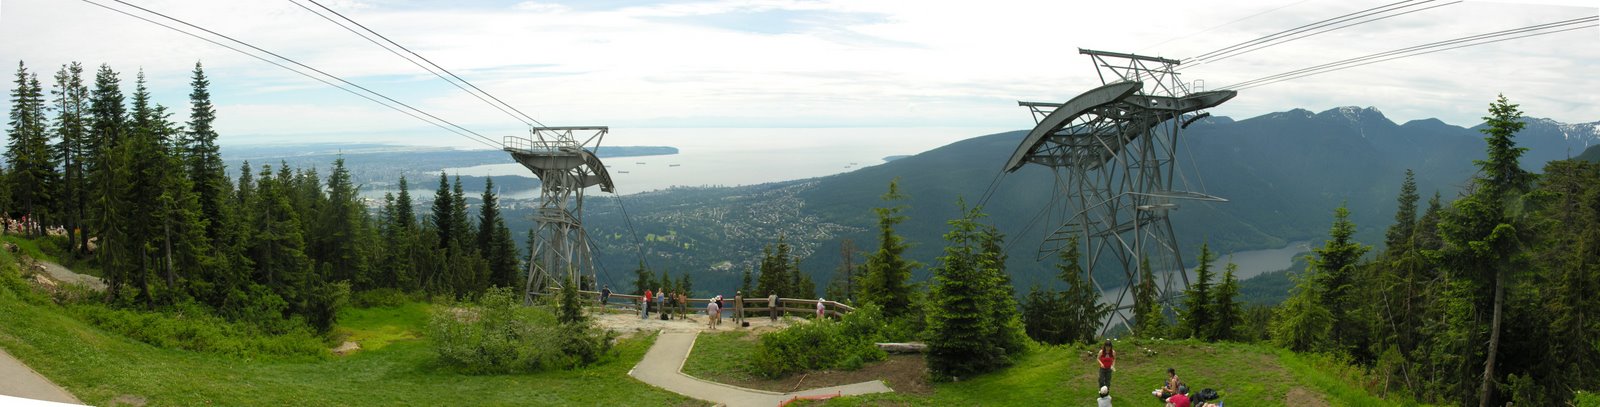 [View+from+Grouse+Mountain.JPG]